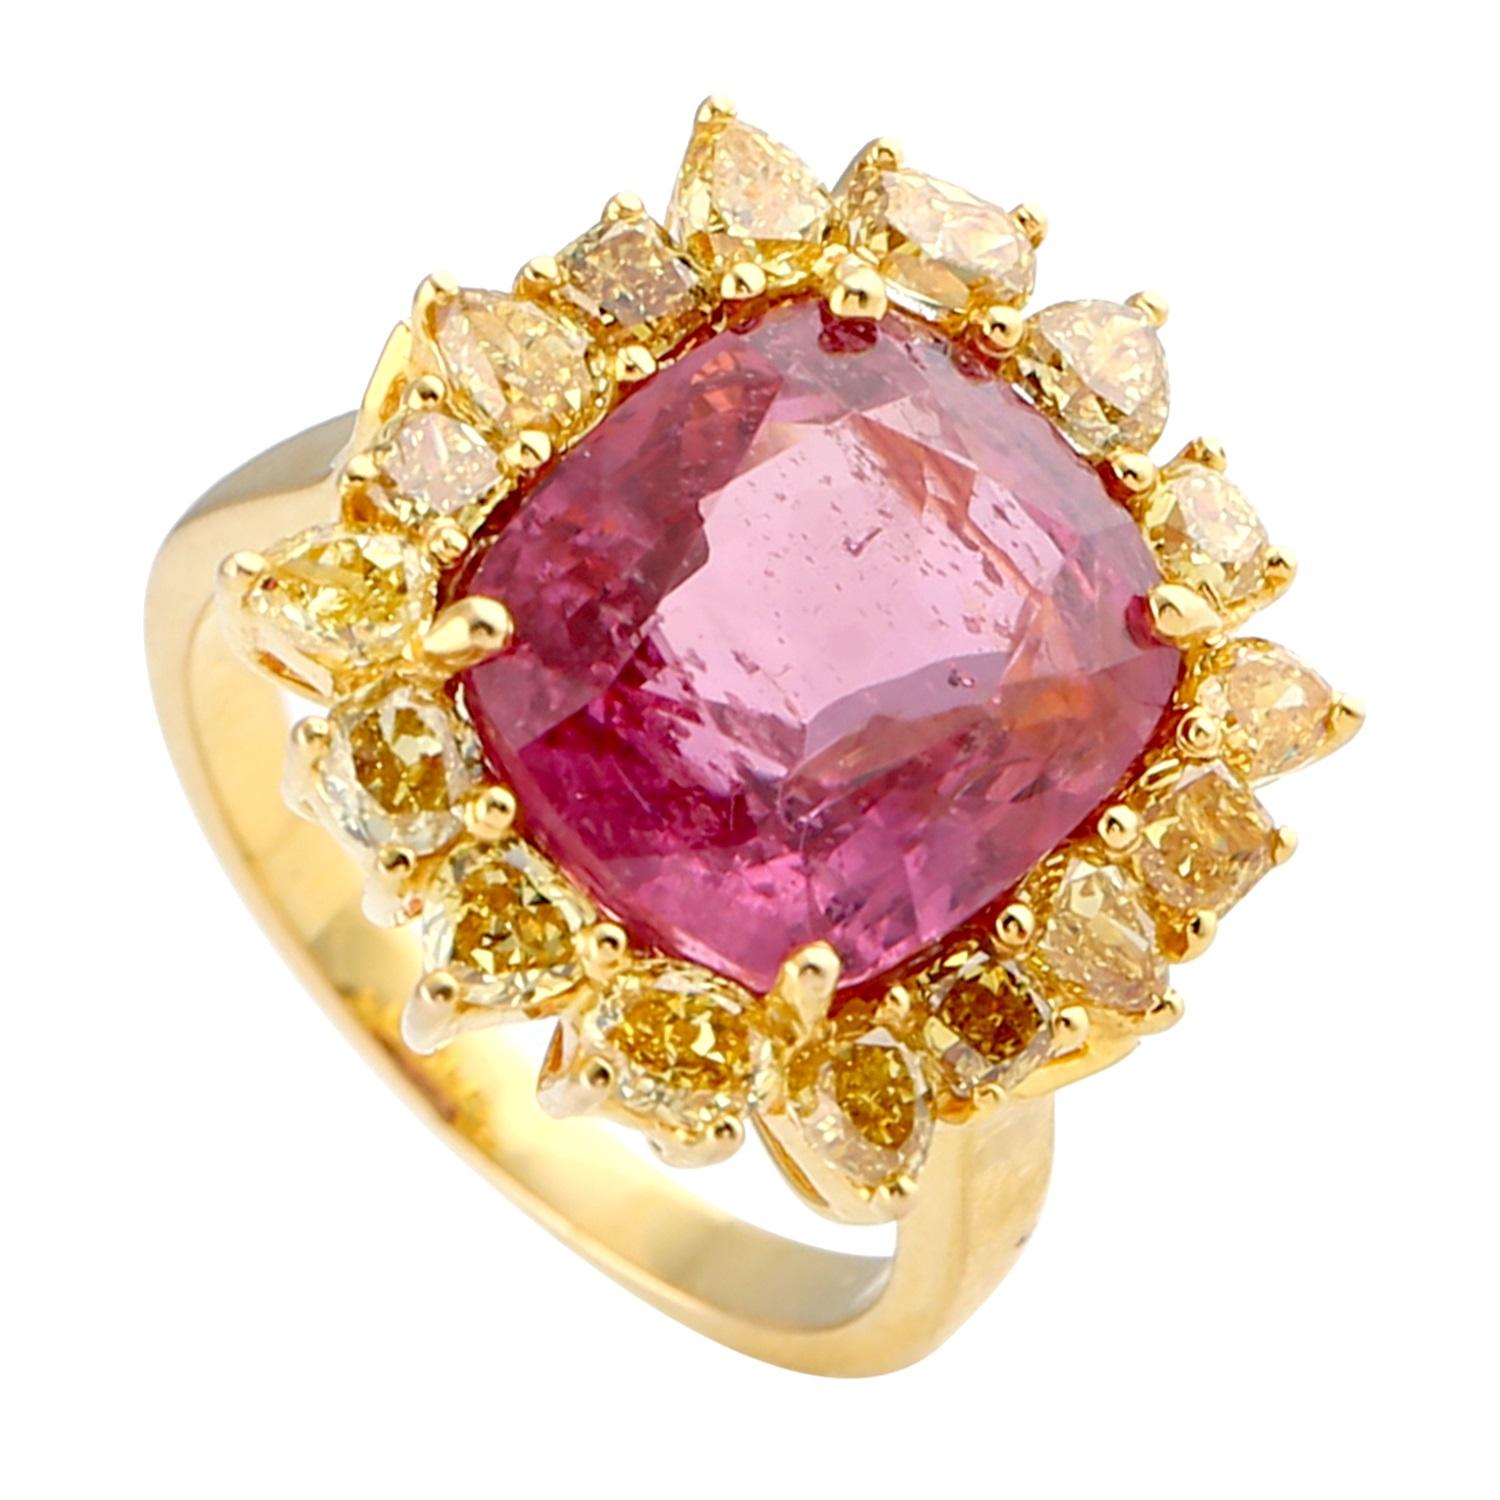 Unique and stylish this cushion shaped red spinel ring with yellow diamonds around in stunningly set in 18K yellow gold.

Ring size: 7 (Can be sized for a cost )

18K Gold: 7.09gms
Spinel: 9.4cts
Diamond: 2.40cts
